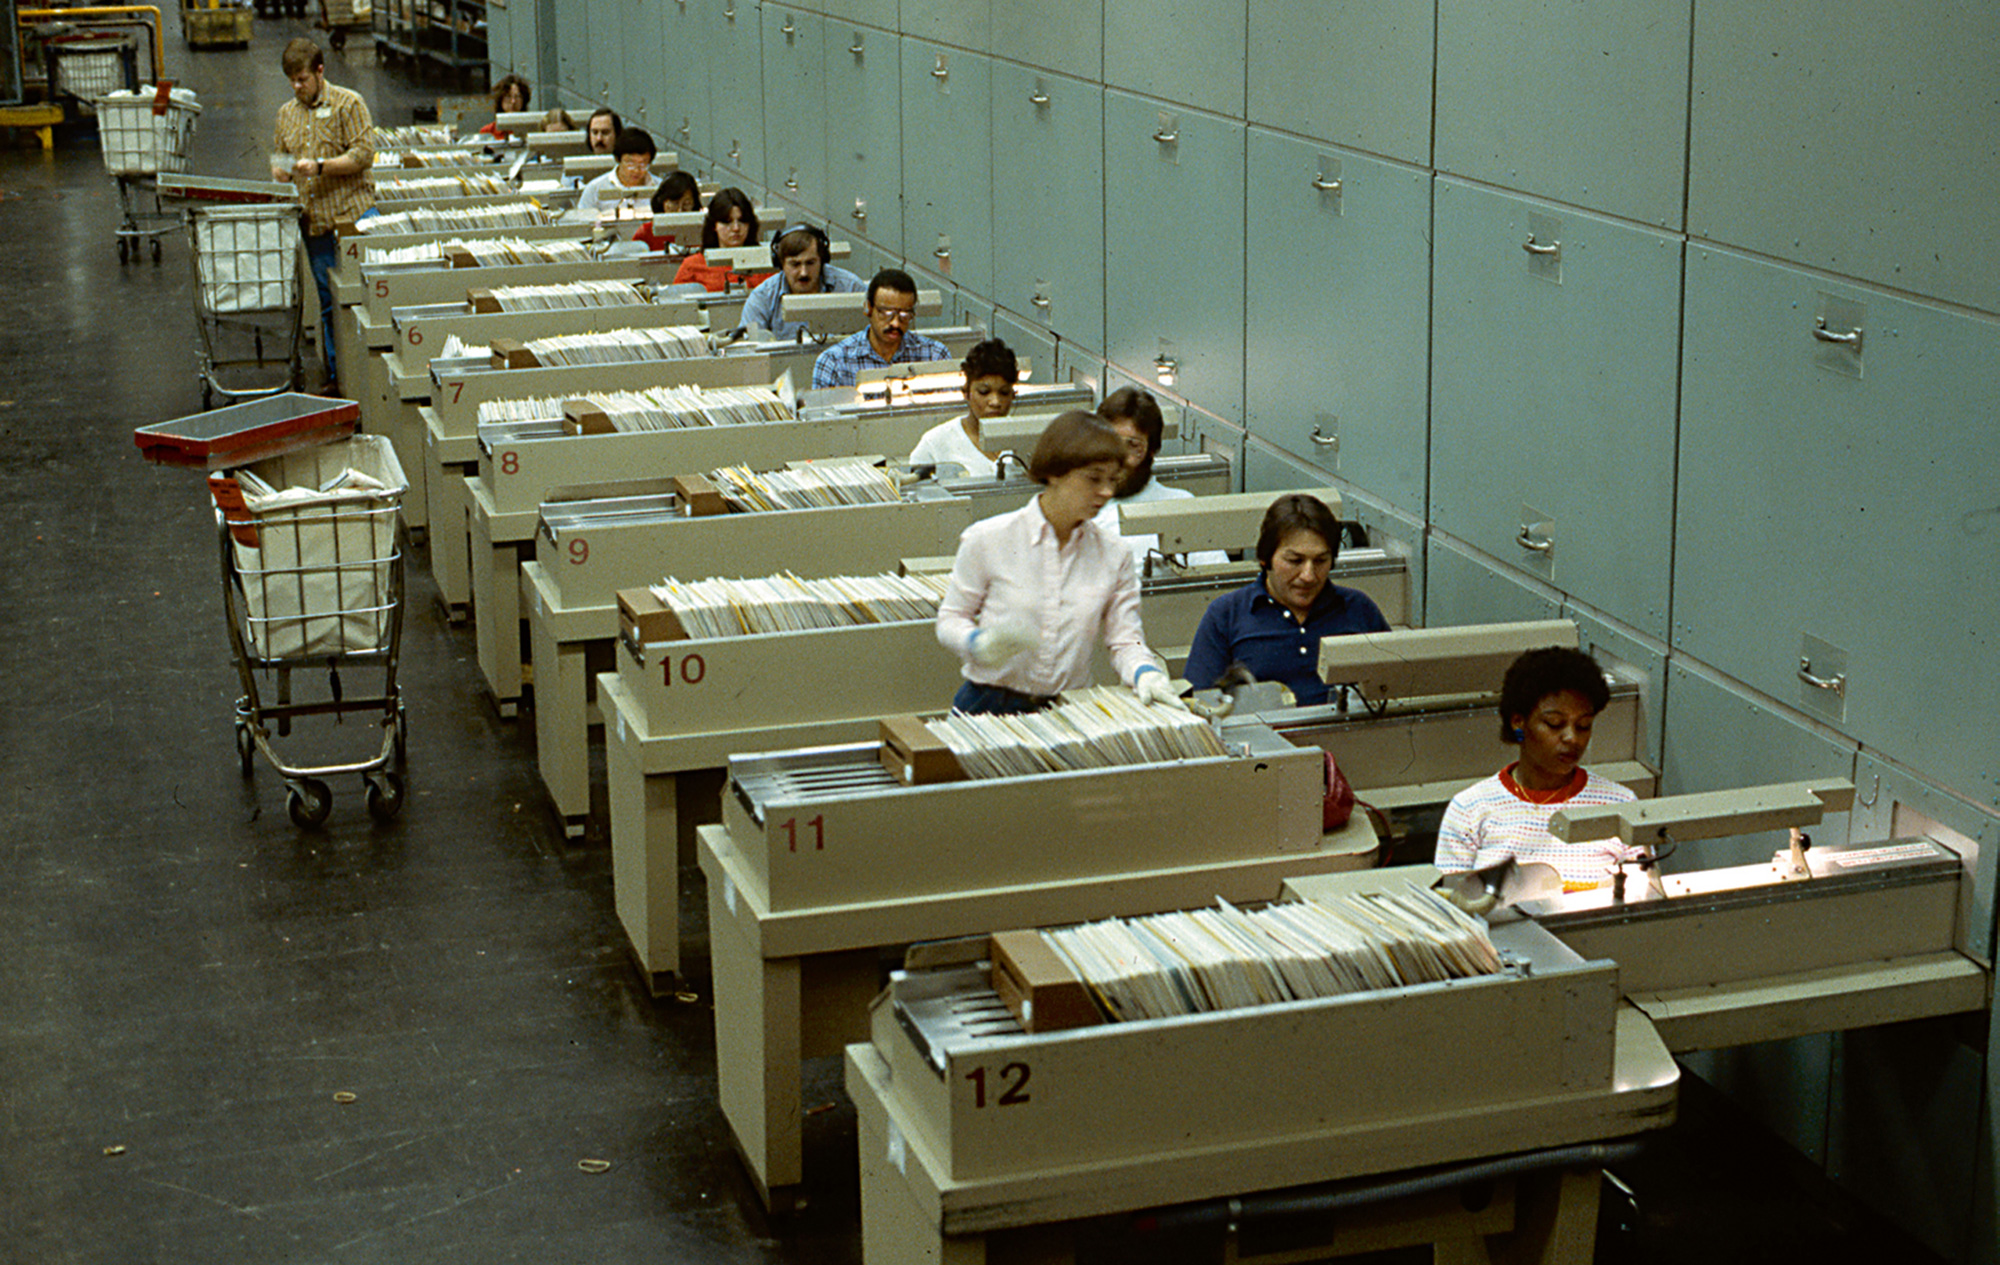 Postal employees at Multi-Position Letter Sorting Machines processing envelopes using the zip code on each, 1970s.